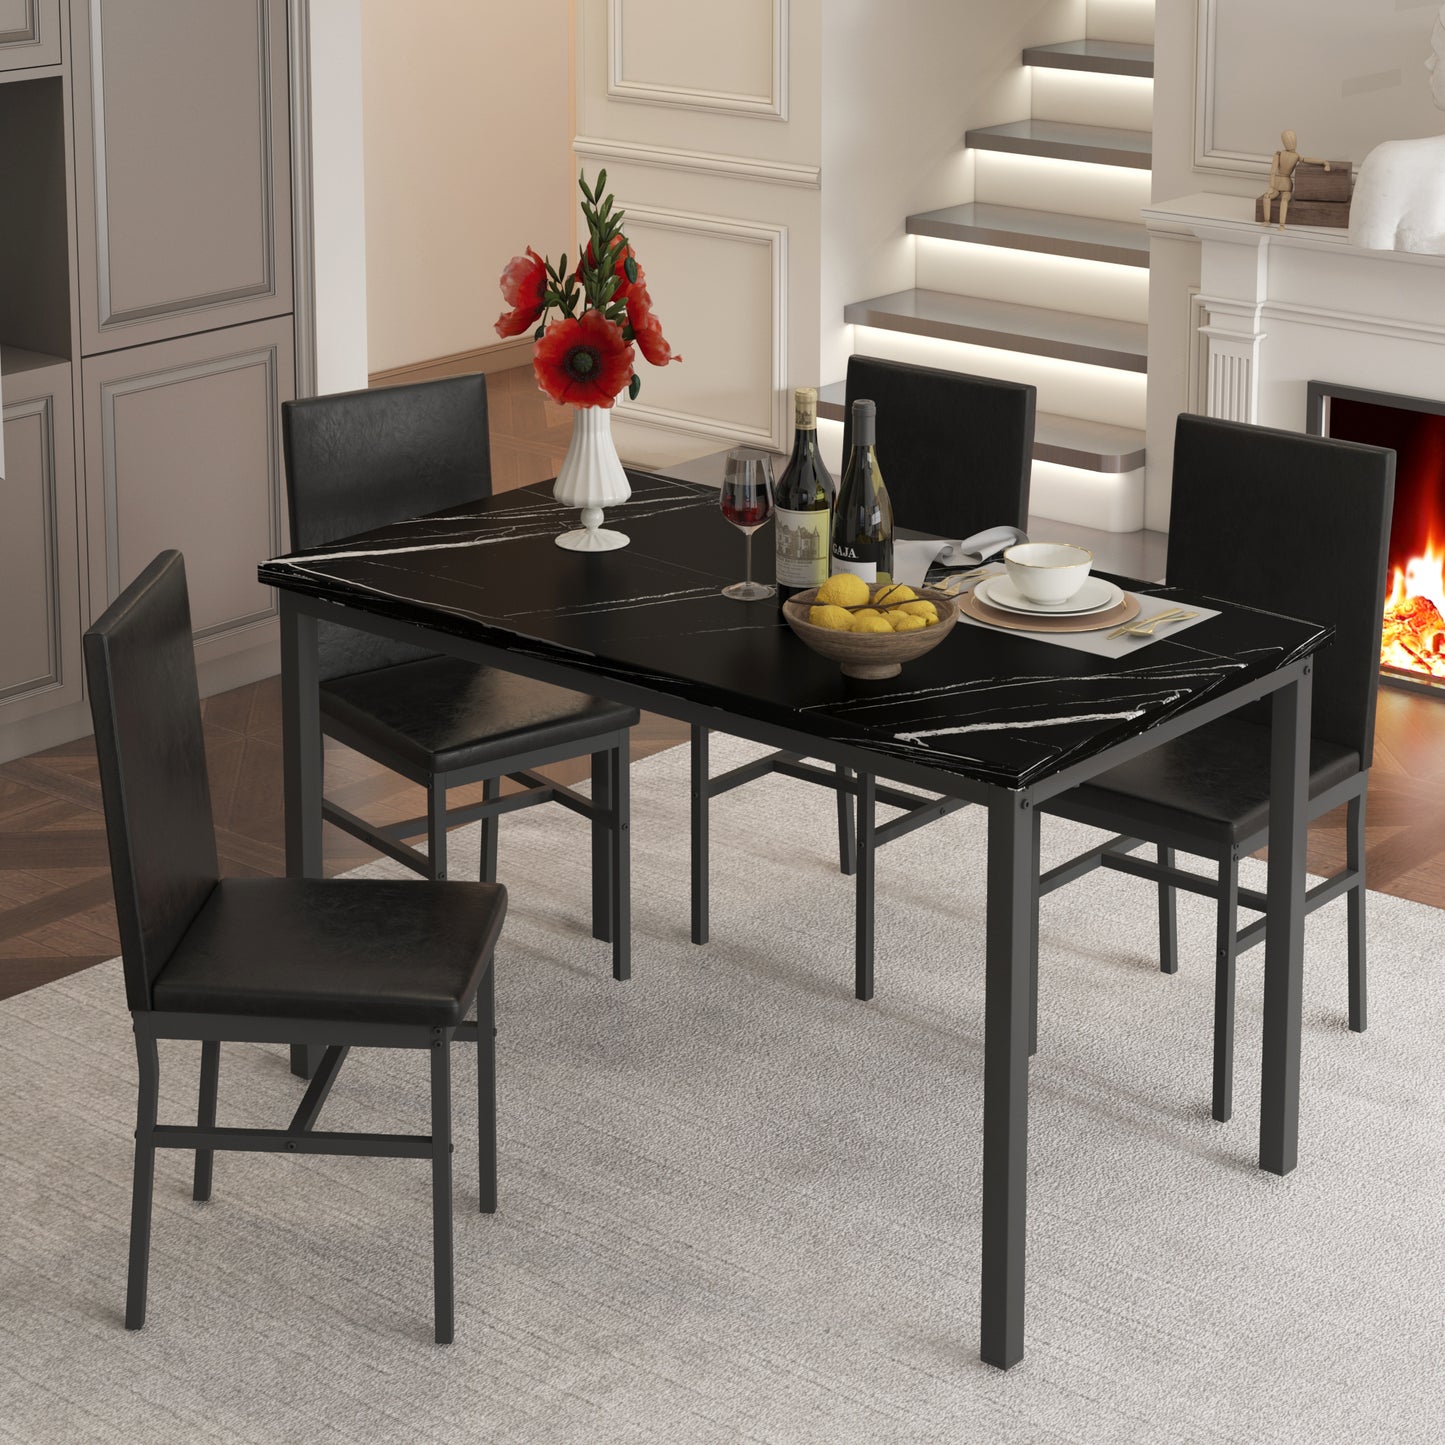 7 Piece Dining Table Set, Kitchen Dining Table and Chairs Set for 6, Modern Marble Table and 4 PU Leather Upholstered Chairs, Home Dining Set for Small Space, Breakfast Nook, D9209